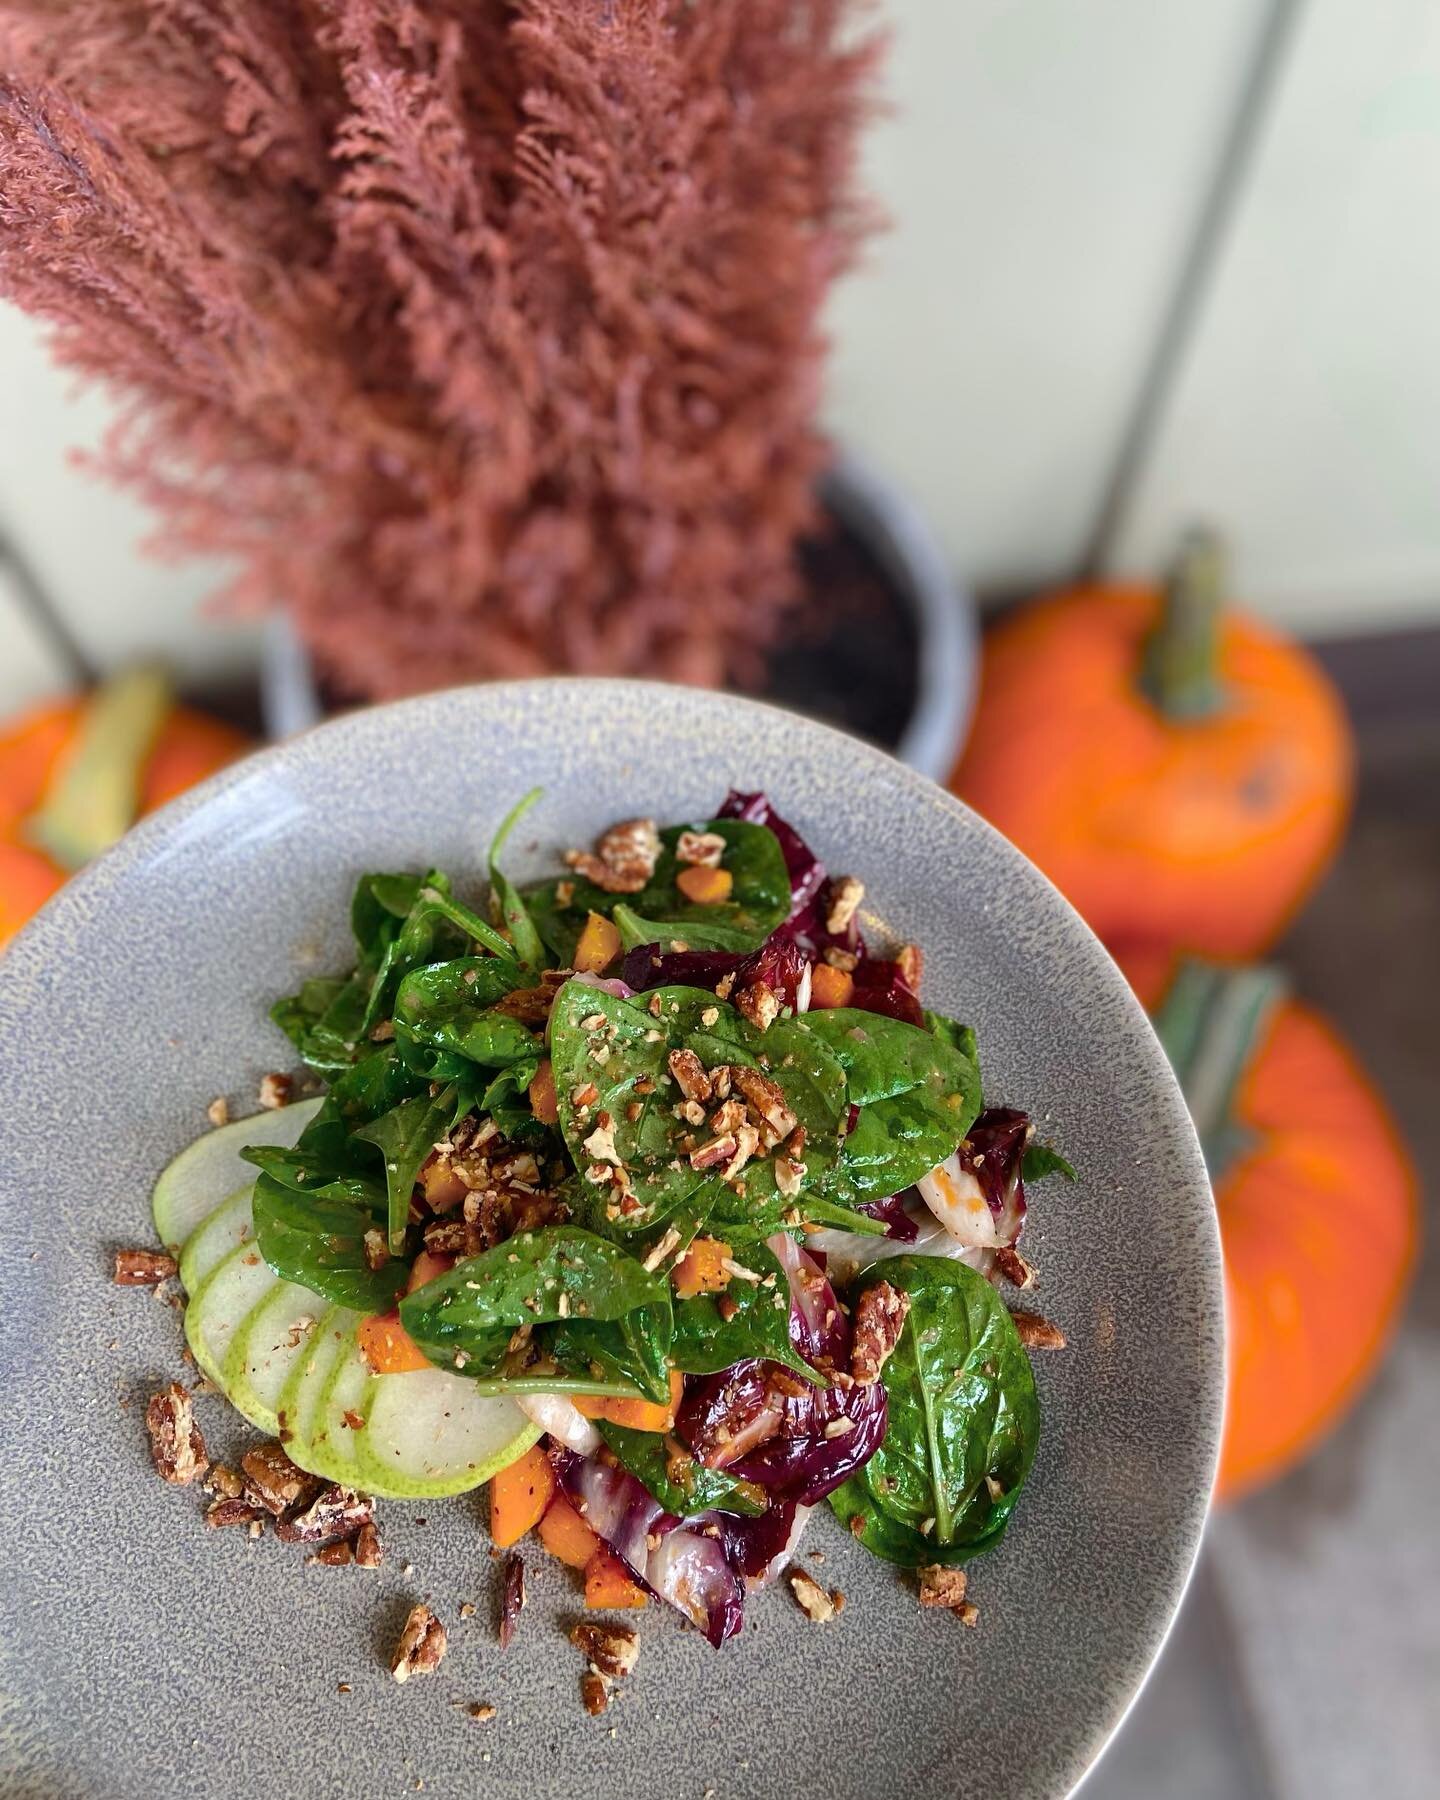 Fall menu is live!  We are beyond excited to share it with you.  Pictured here (descriptions below) are just a few of our new items.  Head to our bio, to check out the full new menu!

-COZY FALL SALAD
roasted butternut squash, wilted radicchio, spina